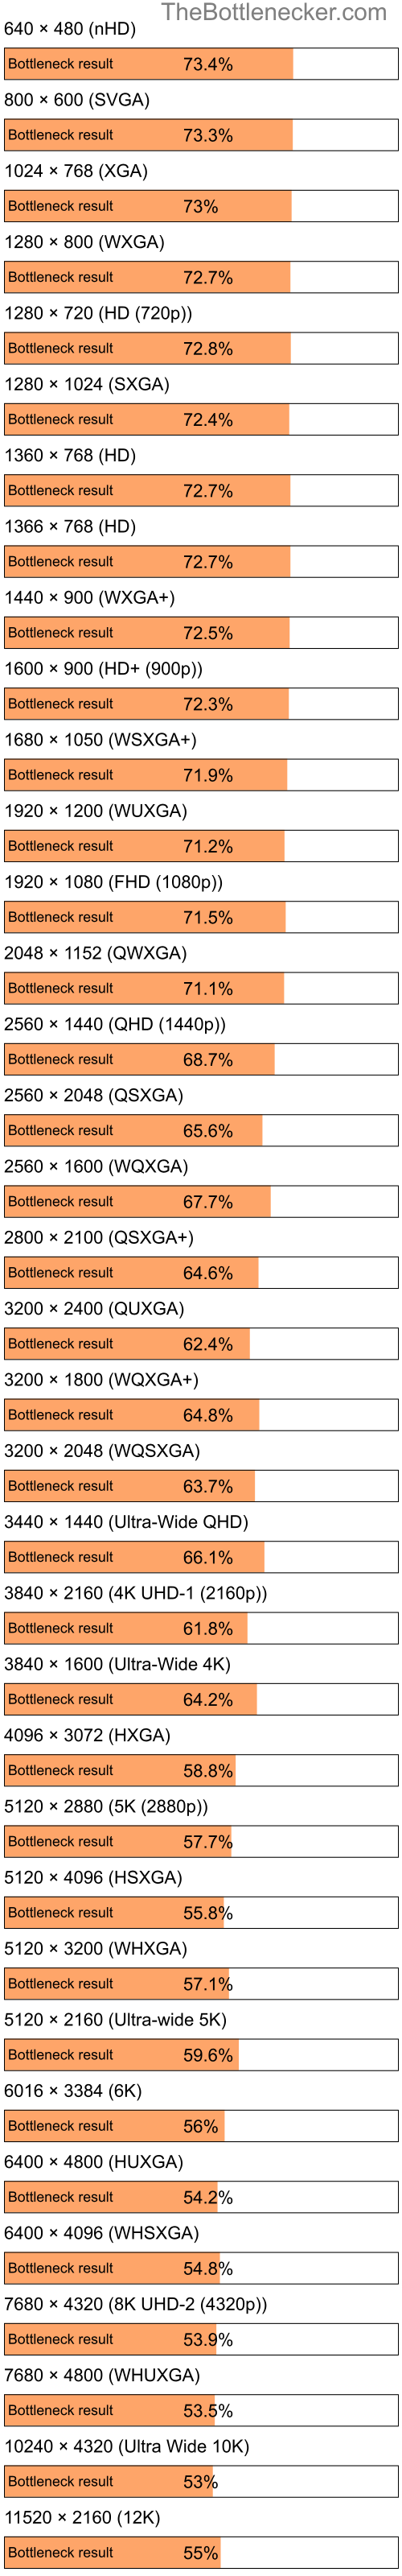 Bottleneck results by resolution for AMD Athlon XP 3000+ and NVIDIA GeForce GTX 1060 in Graphic Card Intense Tasks